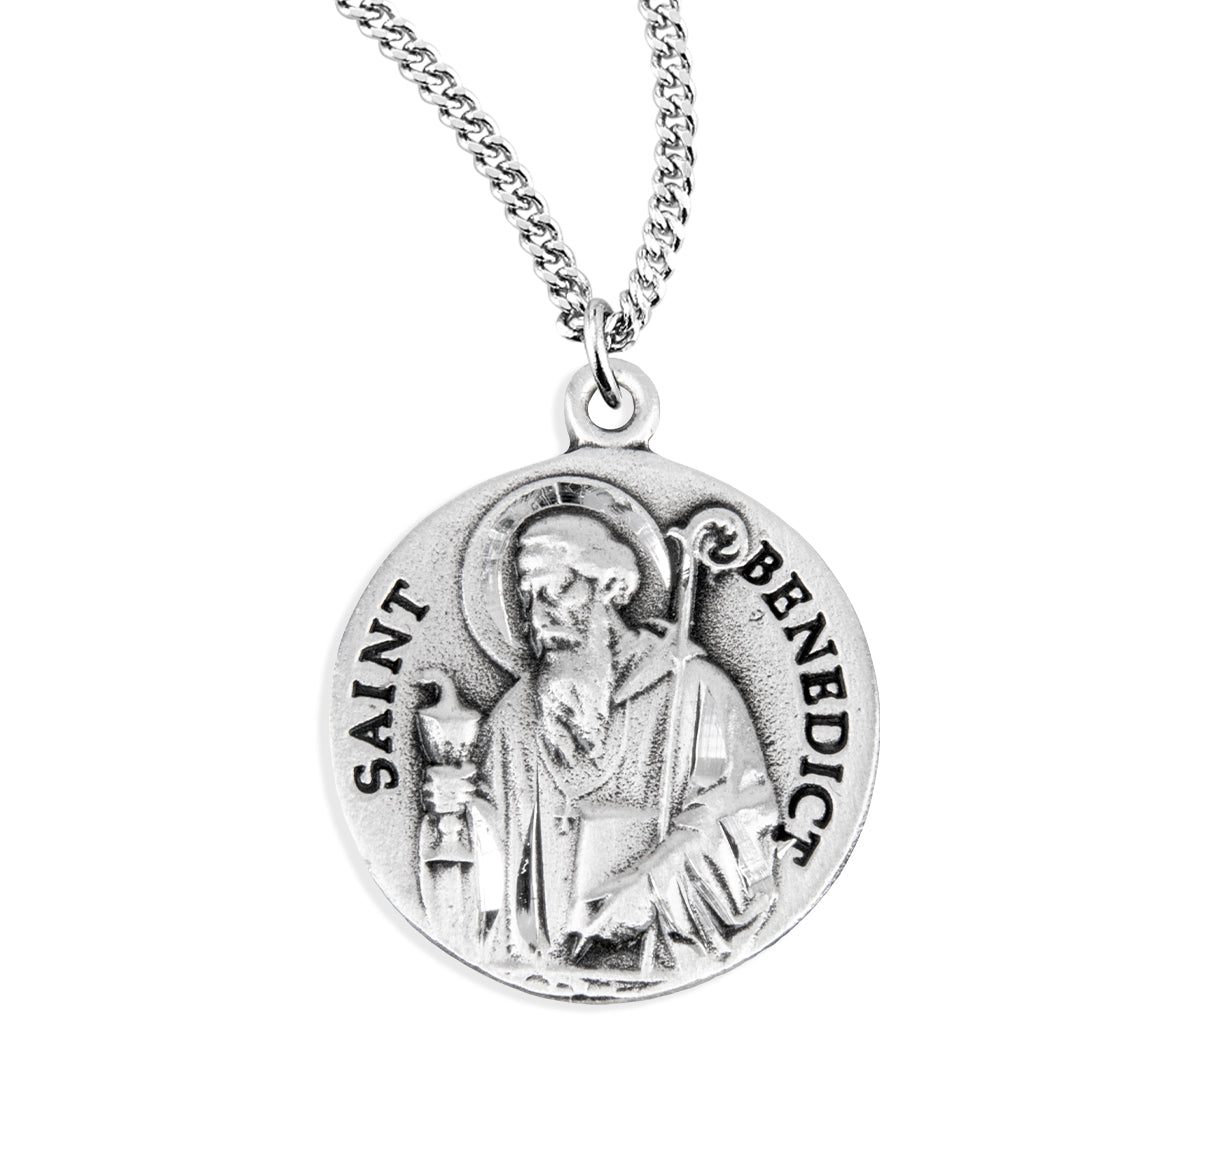 Saint Benedict Round Sterling Silver Medal